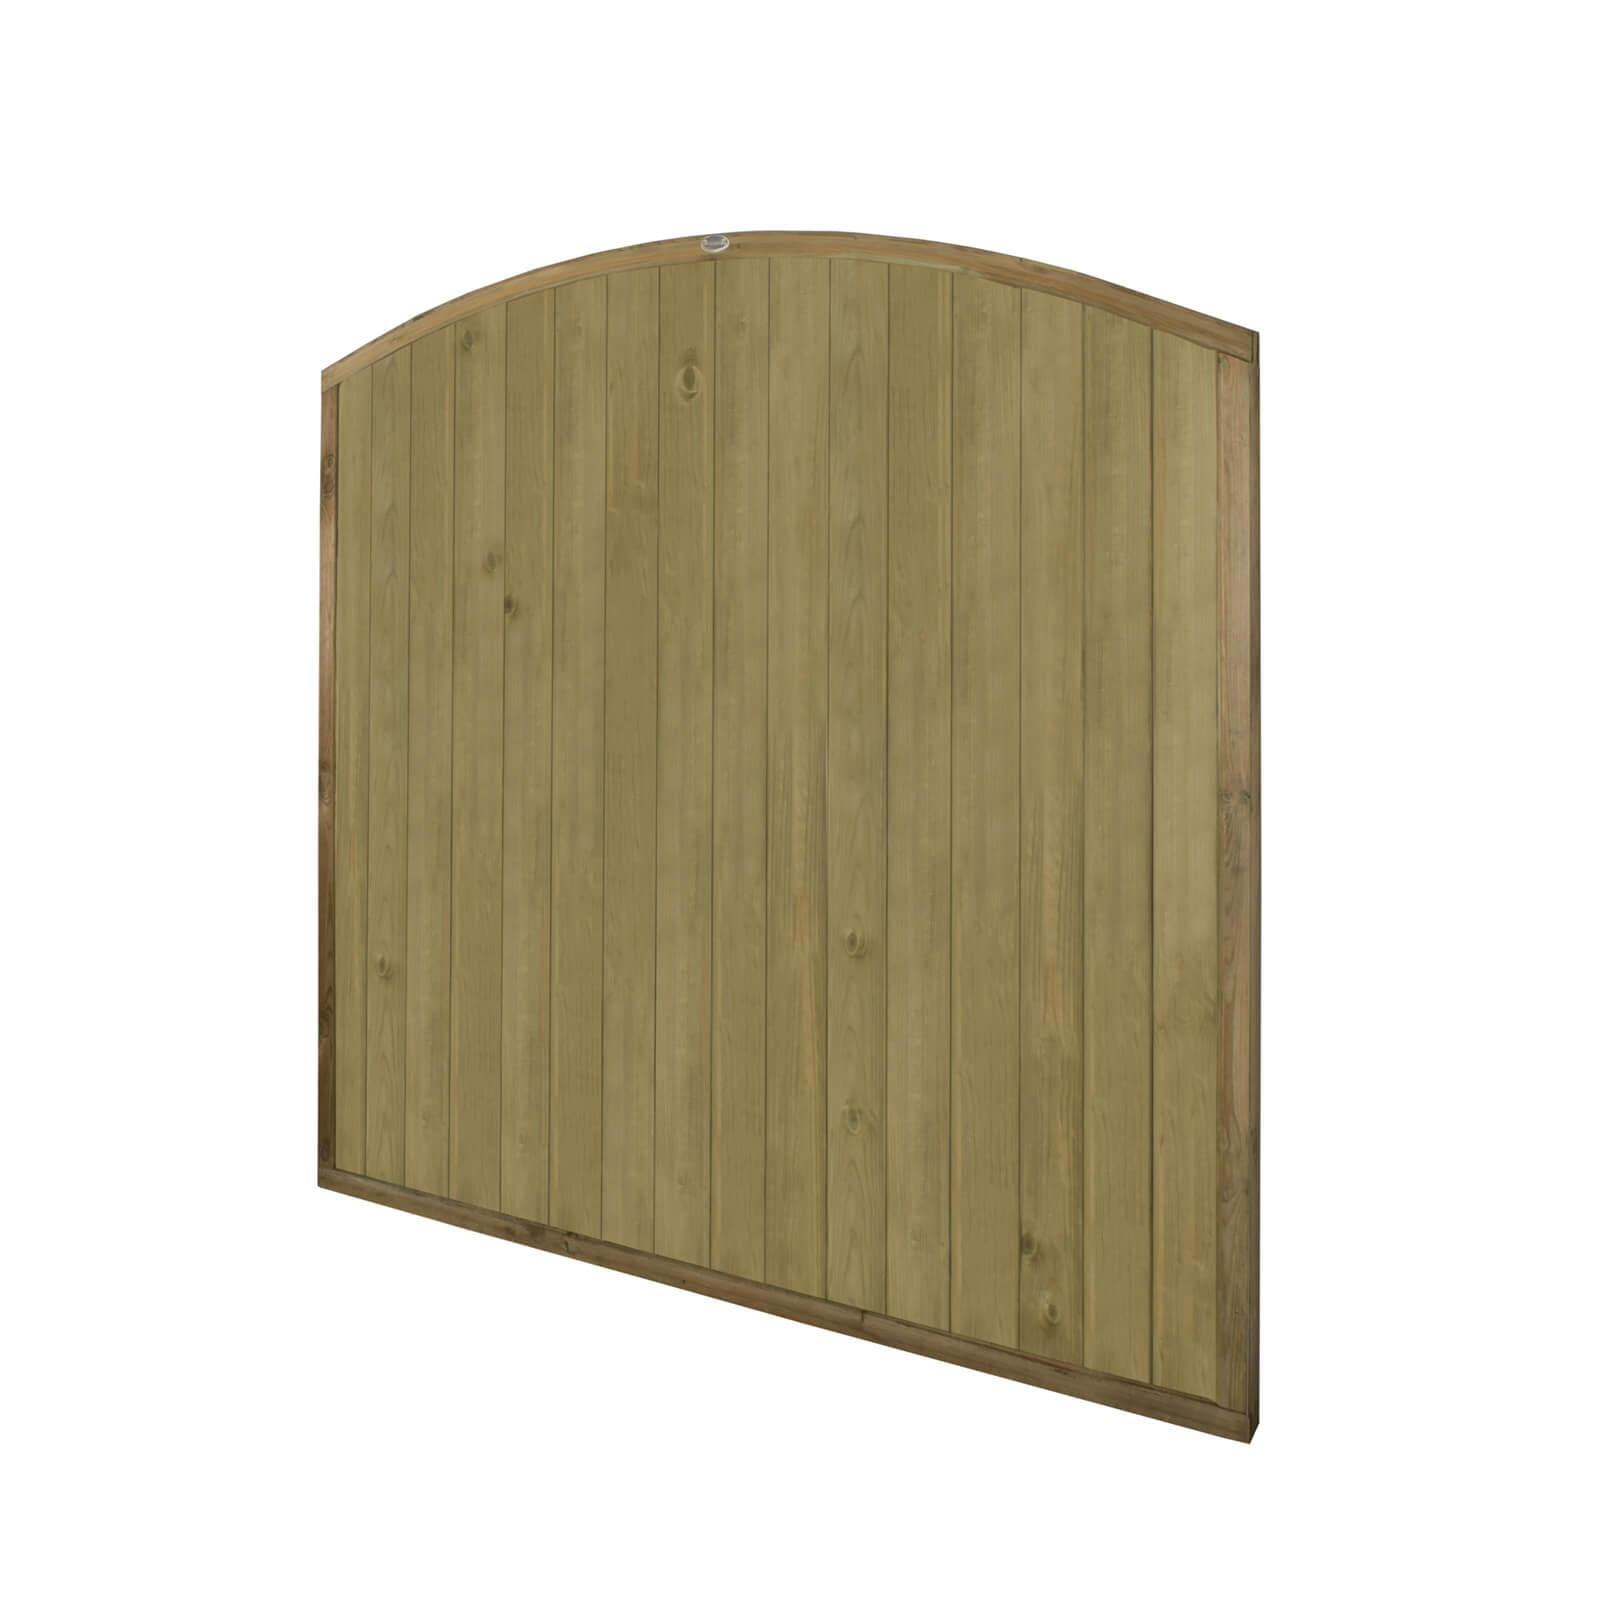 Forest Dome Tongue and Groove Panel - 6ft - Pack of 4